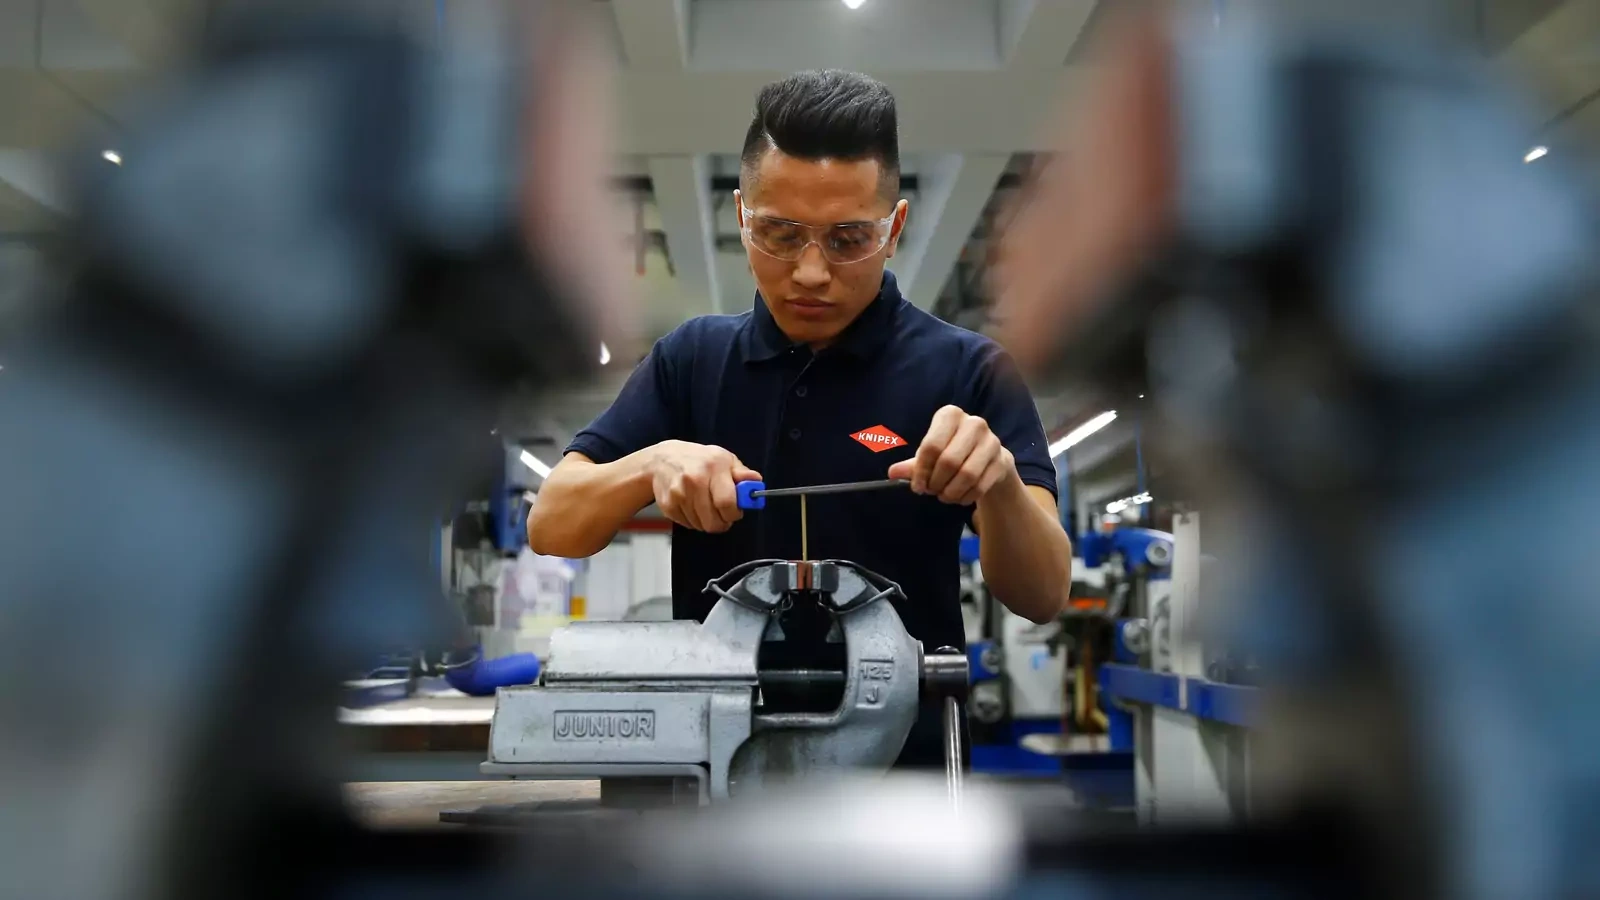 An Afghan refugee participates in a training program at a tools manufacturer in the city of Wuppertal in western Germany.